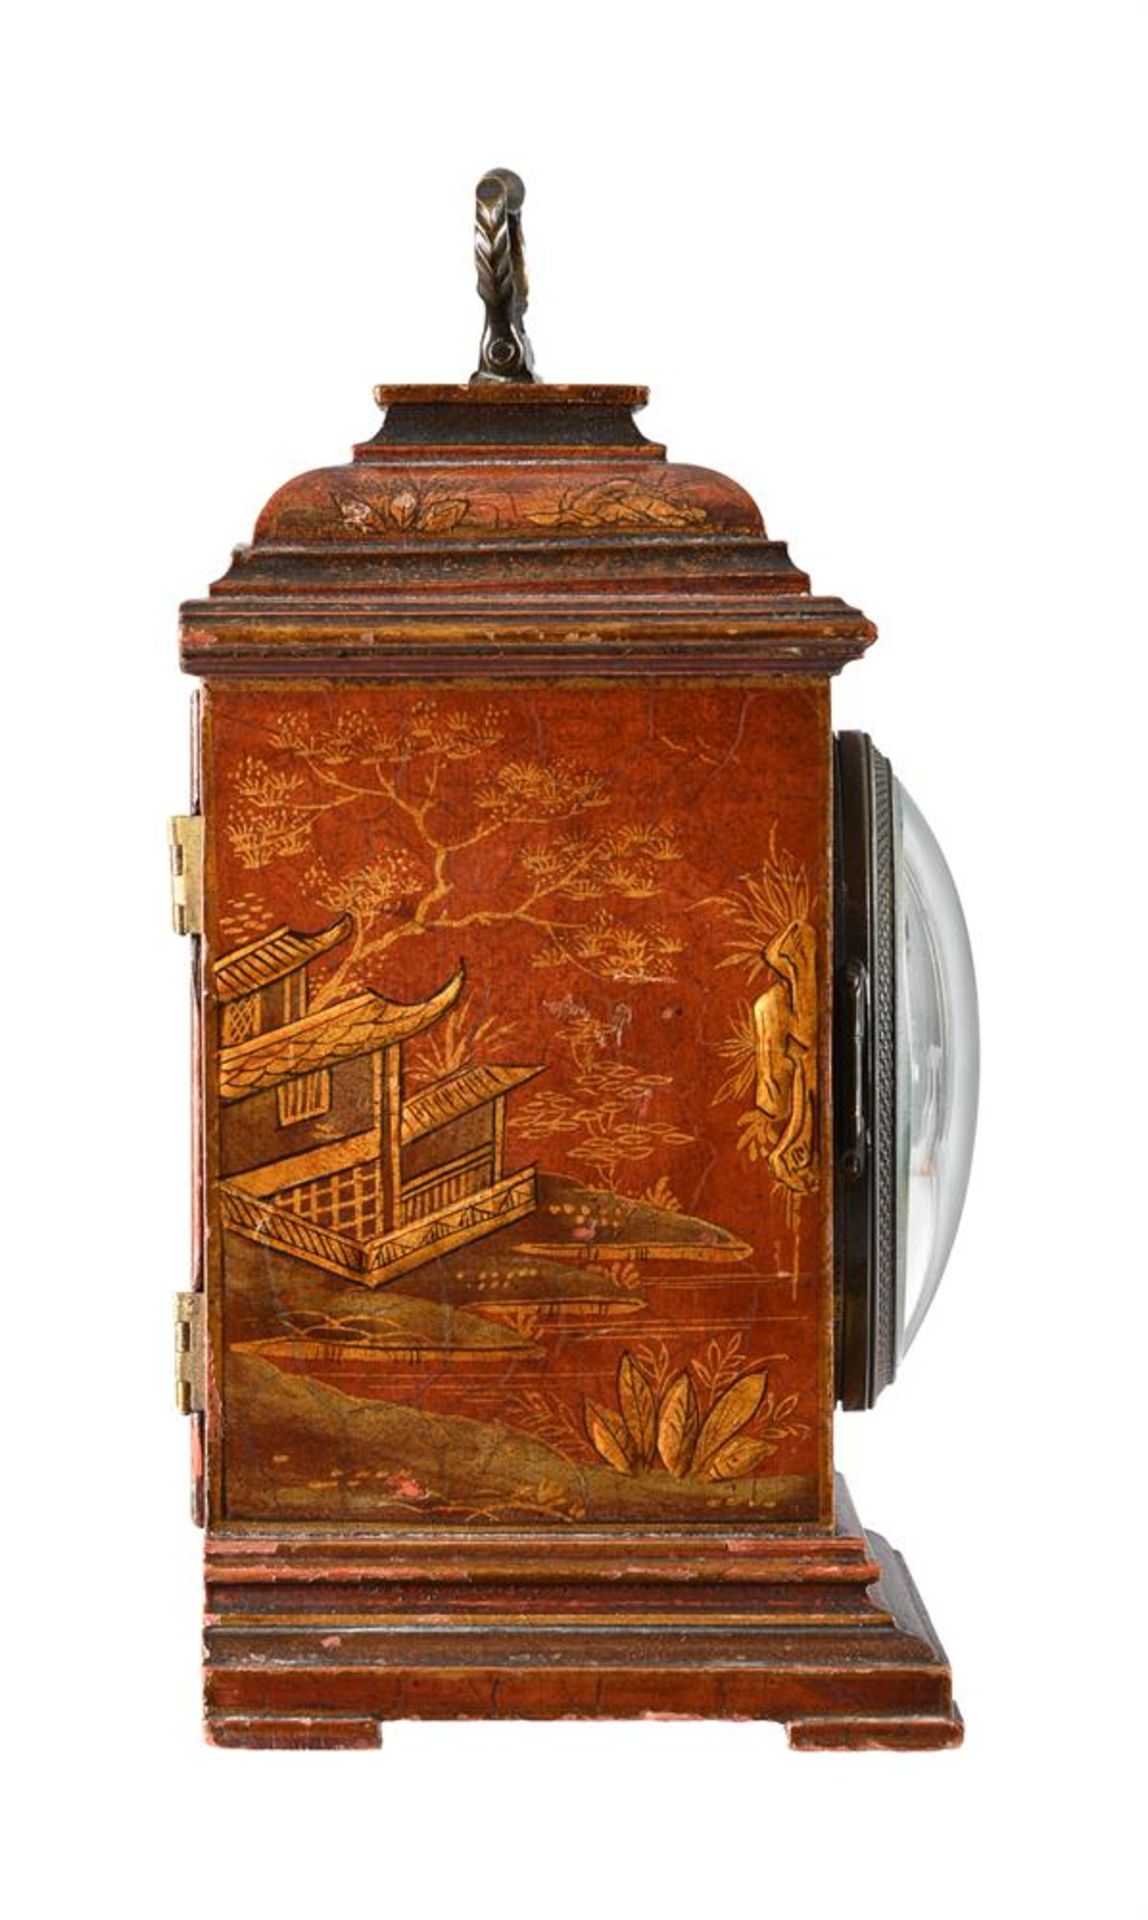 AN EDWARDIAN RED CHINOISERIE JAPANNED SMALL MANTEL/BRACKET CLOCK - Image 2 of 3